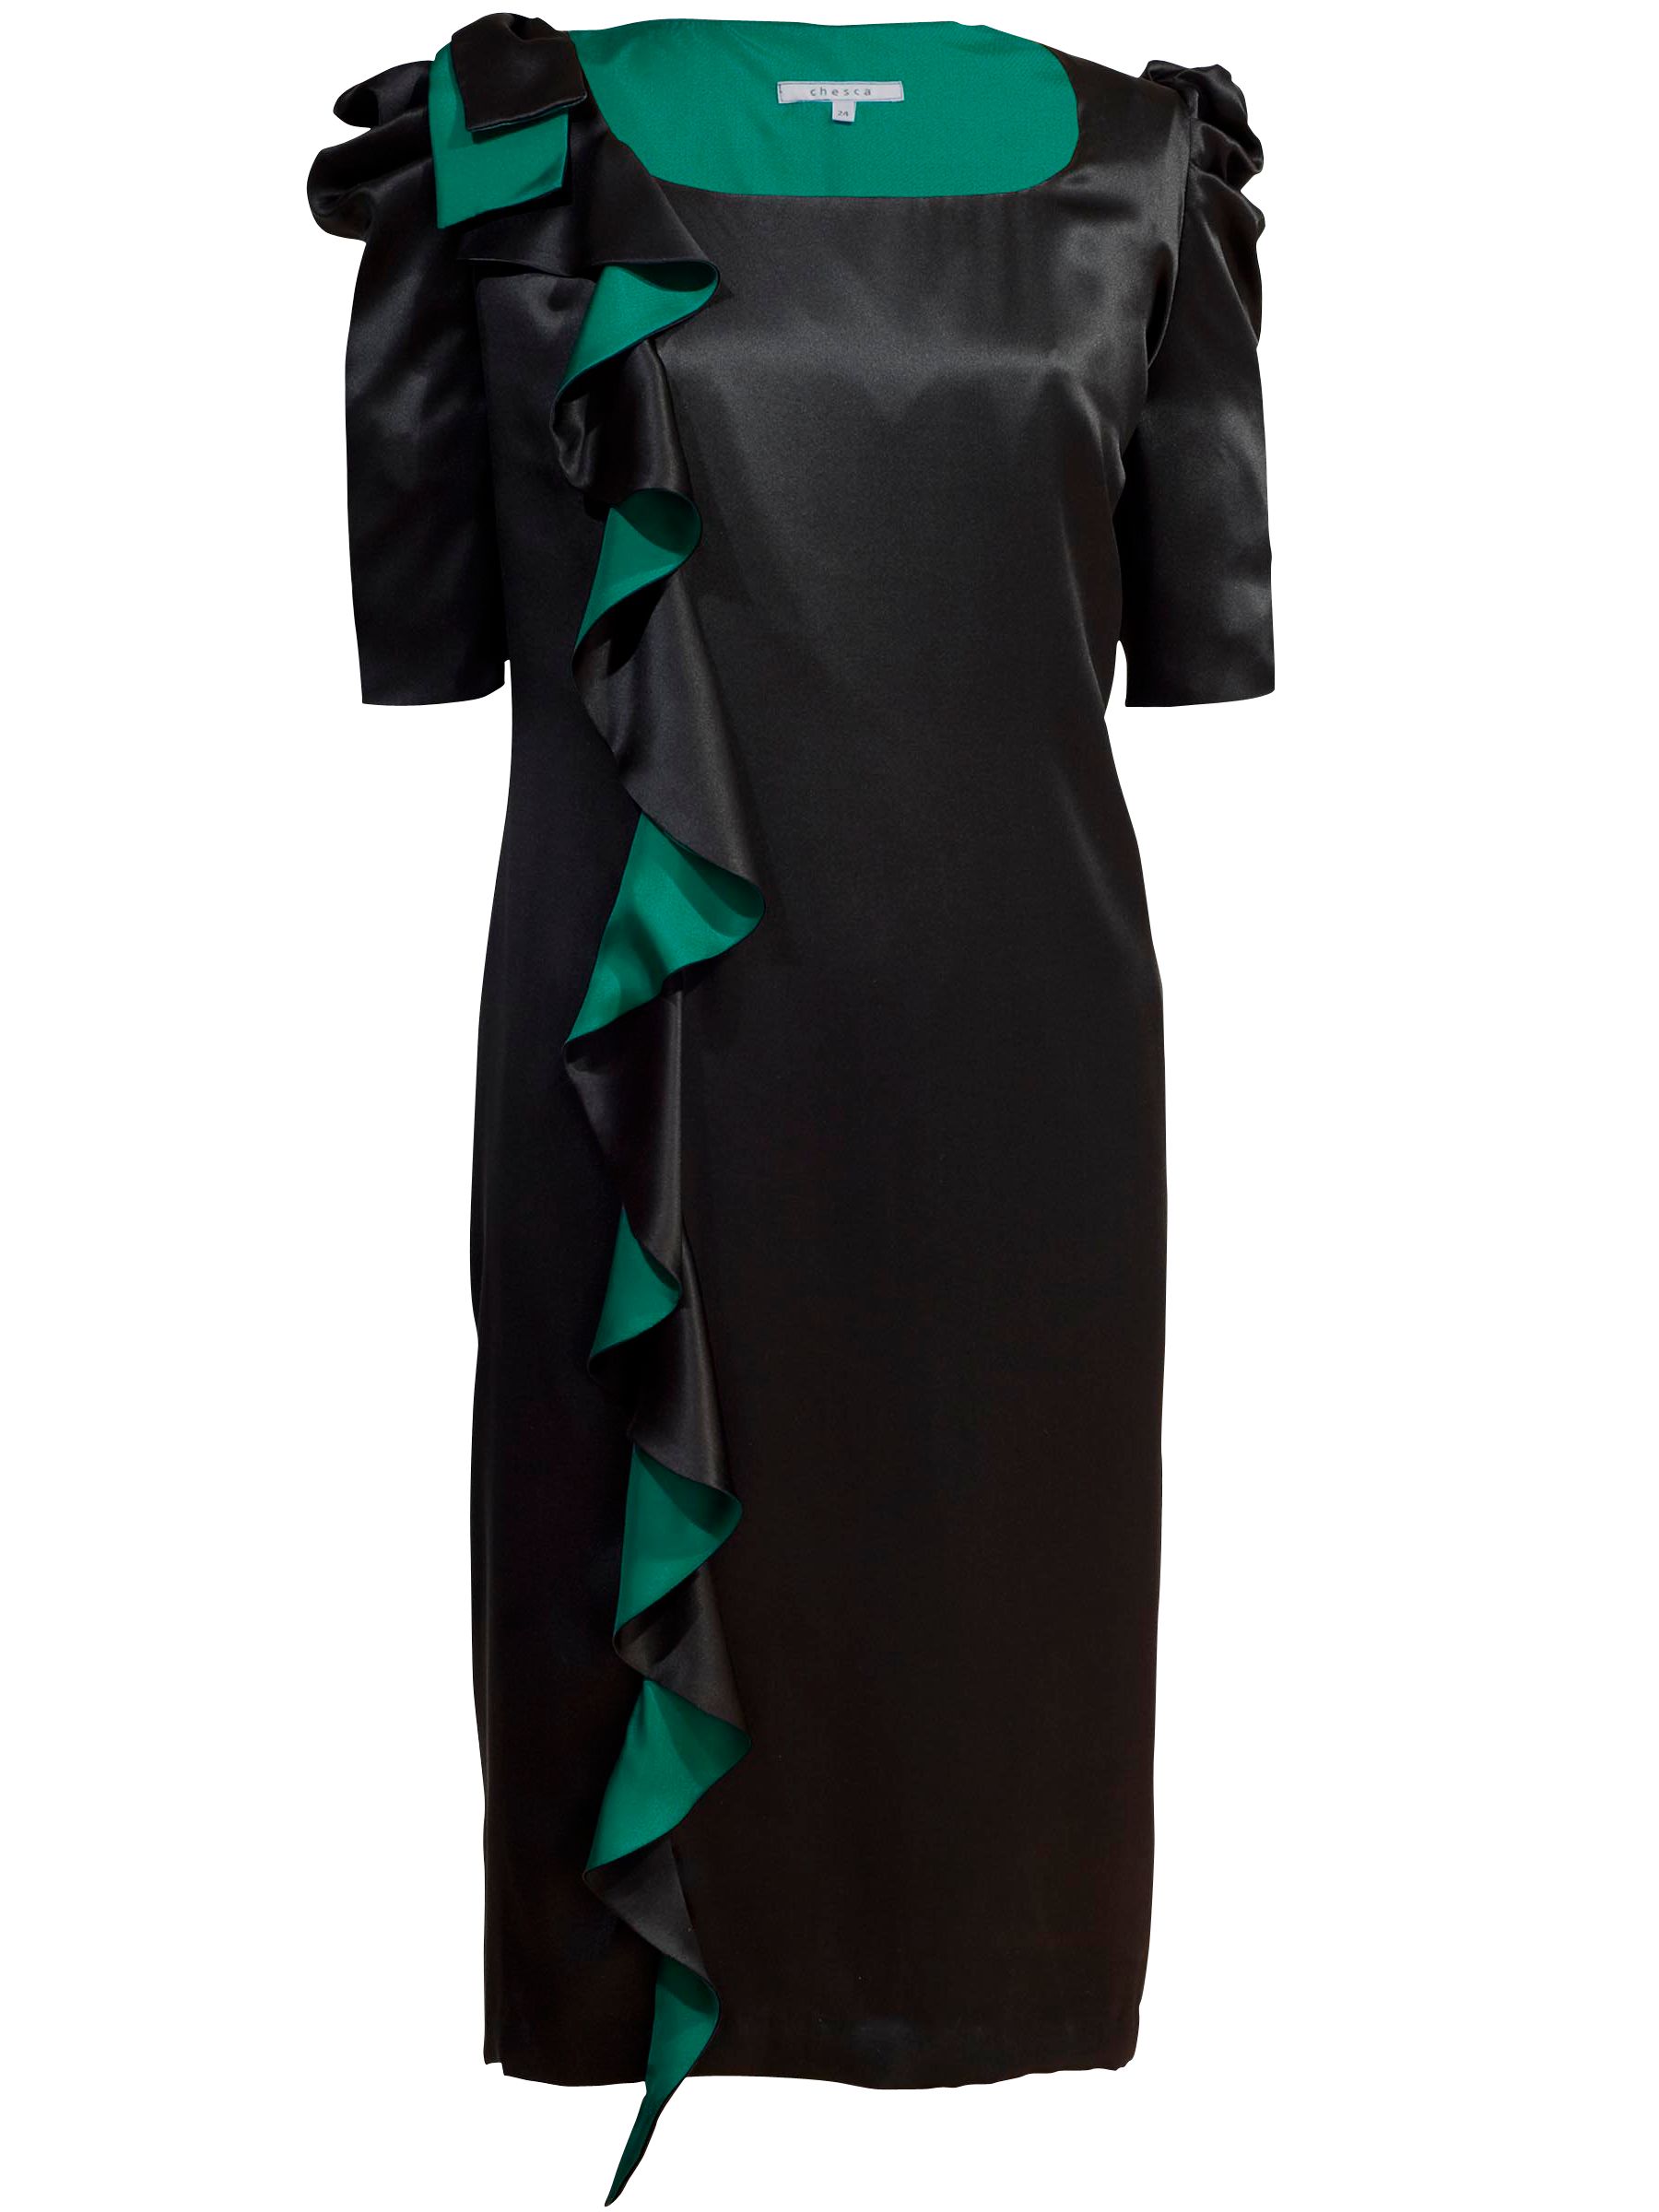 Chesca Now By Chesca Waterfall Shift Dress, Black/Jade at John Lewis